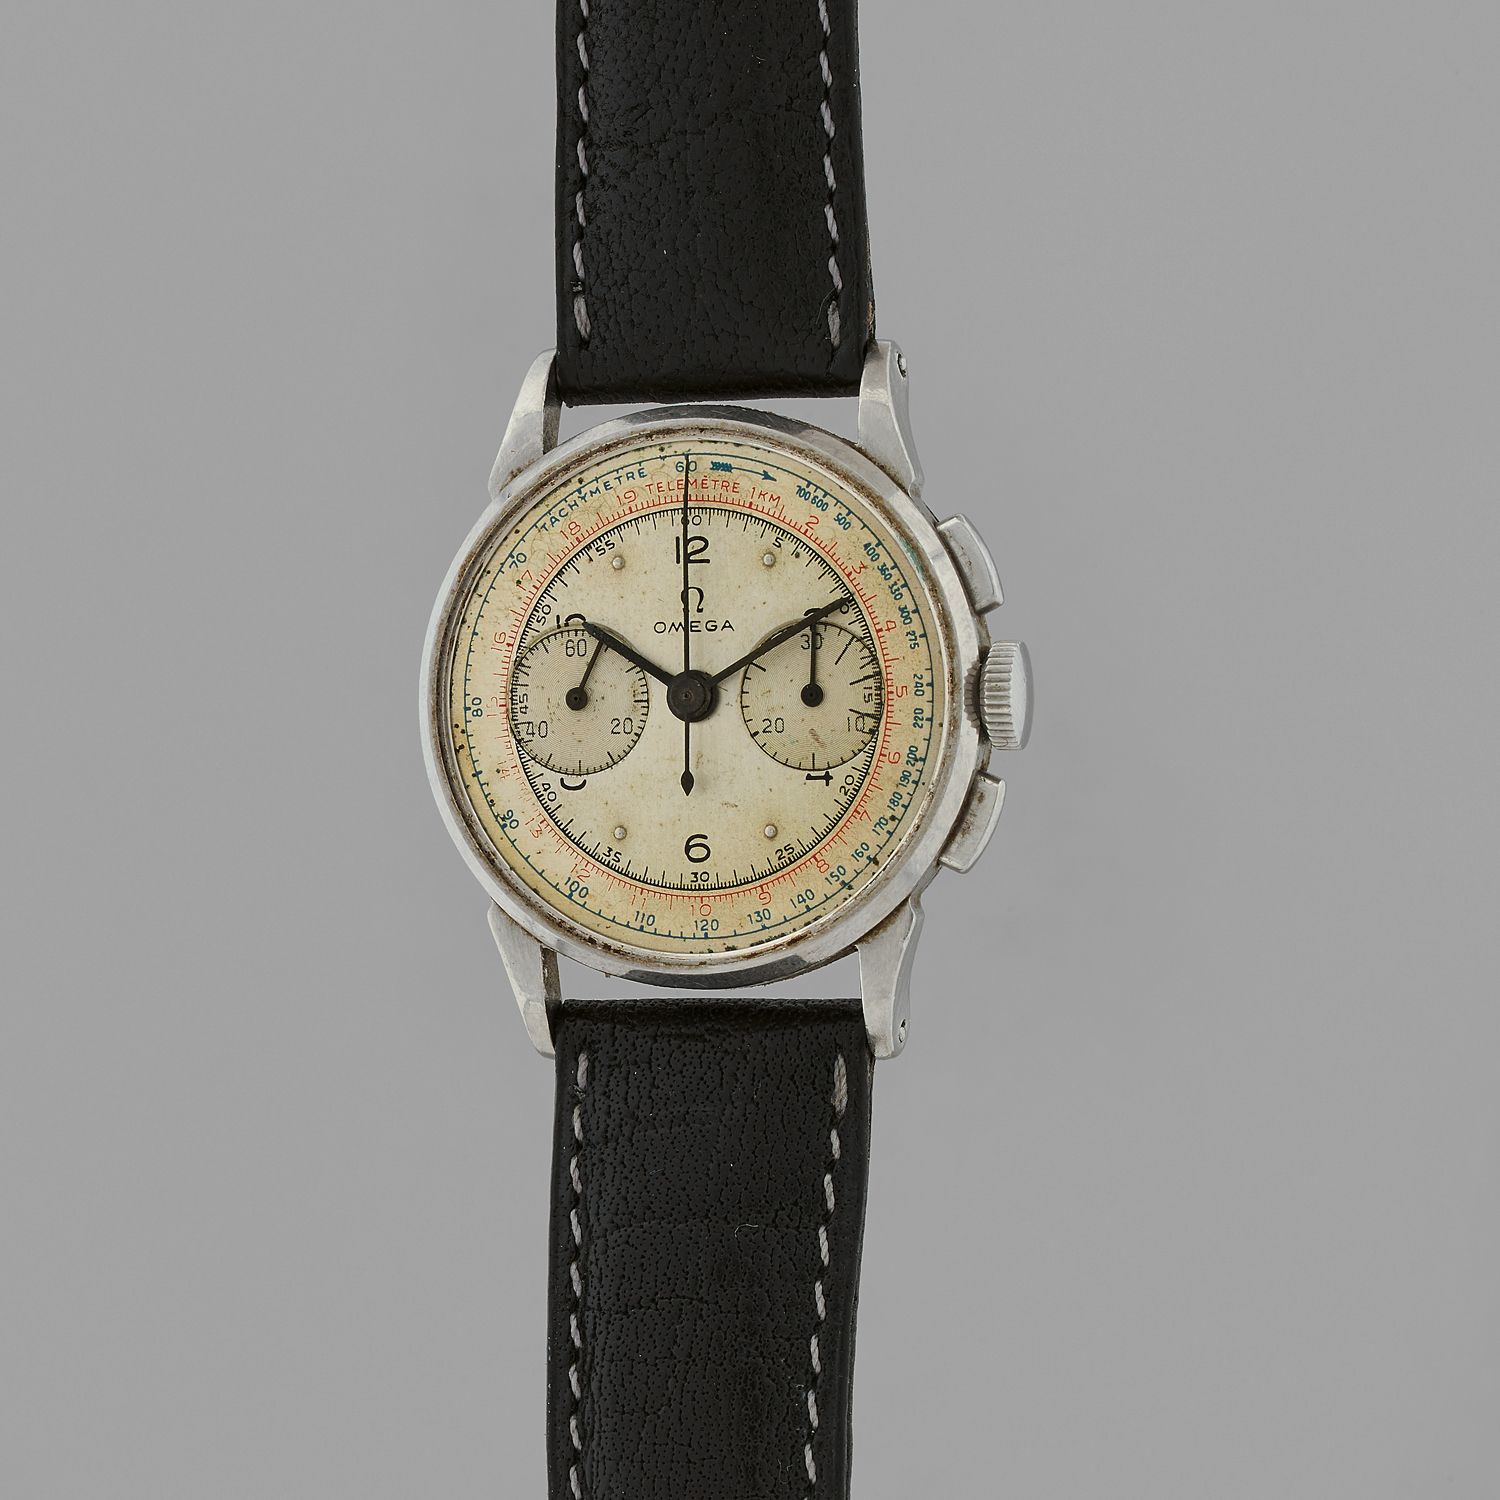 Null OMEGA
27 Chro.
Circa: 1940.
Steel chronograph watch. Round case, clipped ba&hellip;